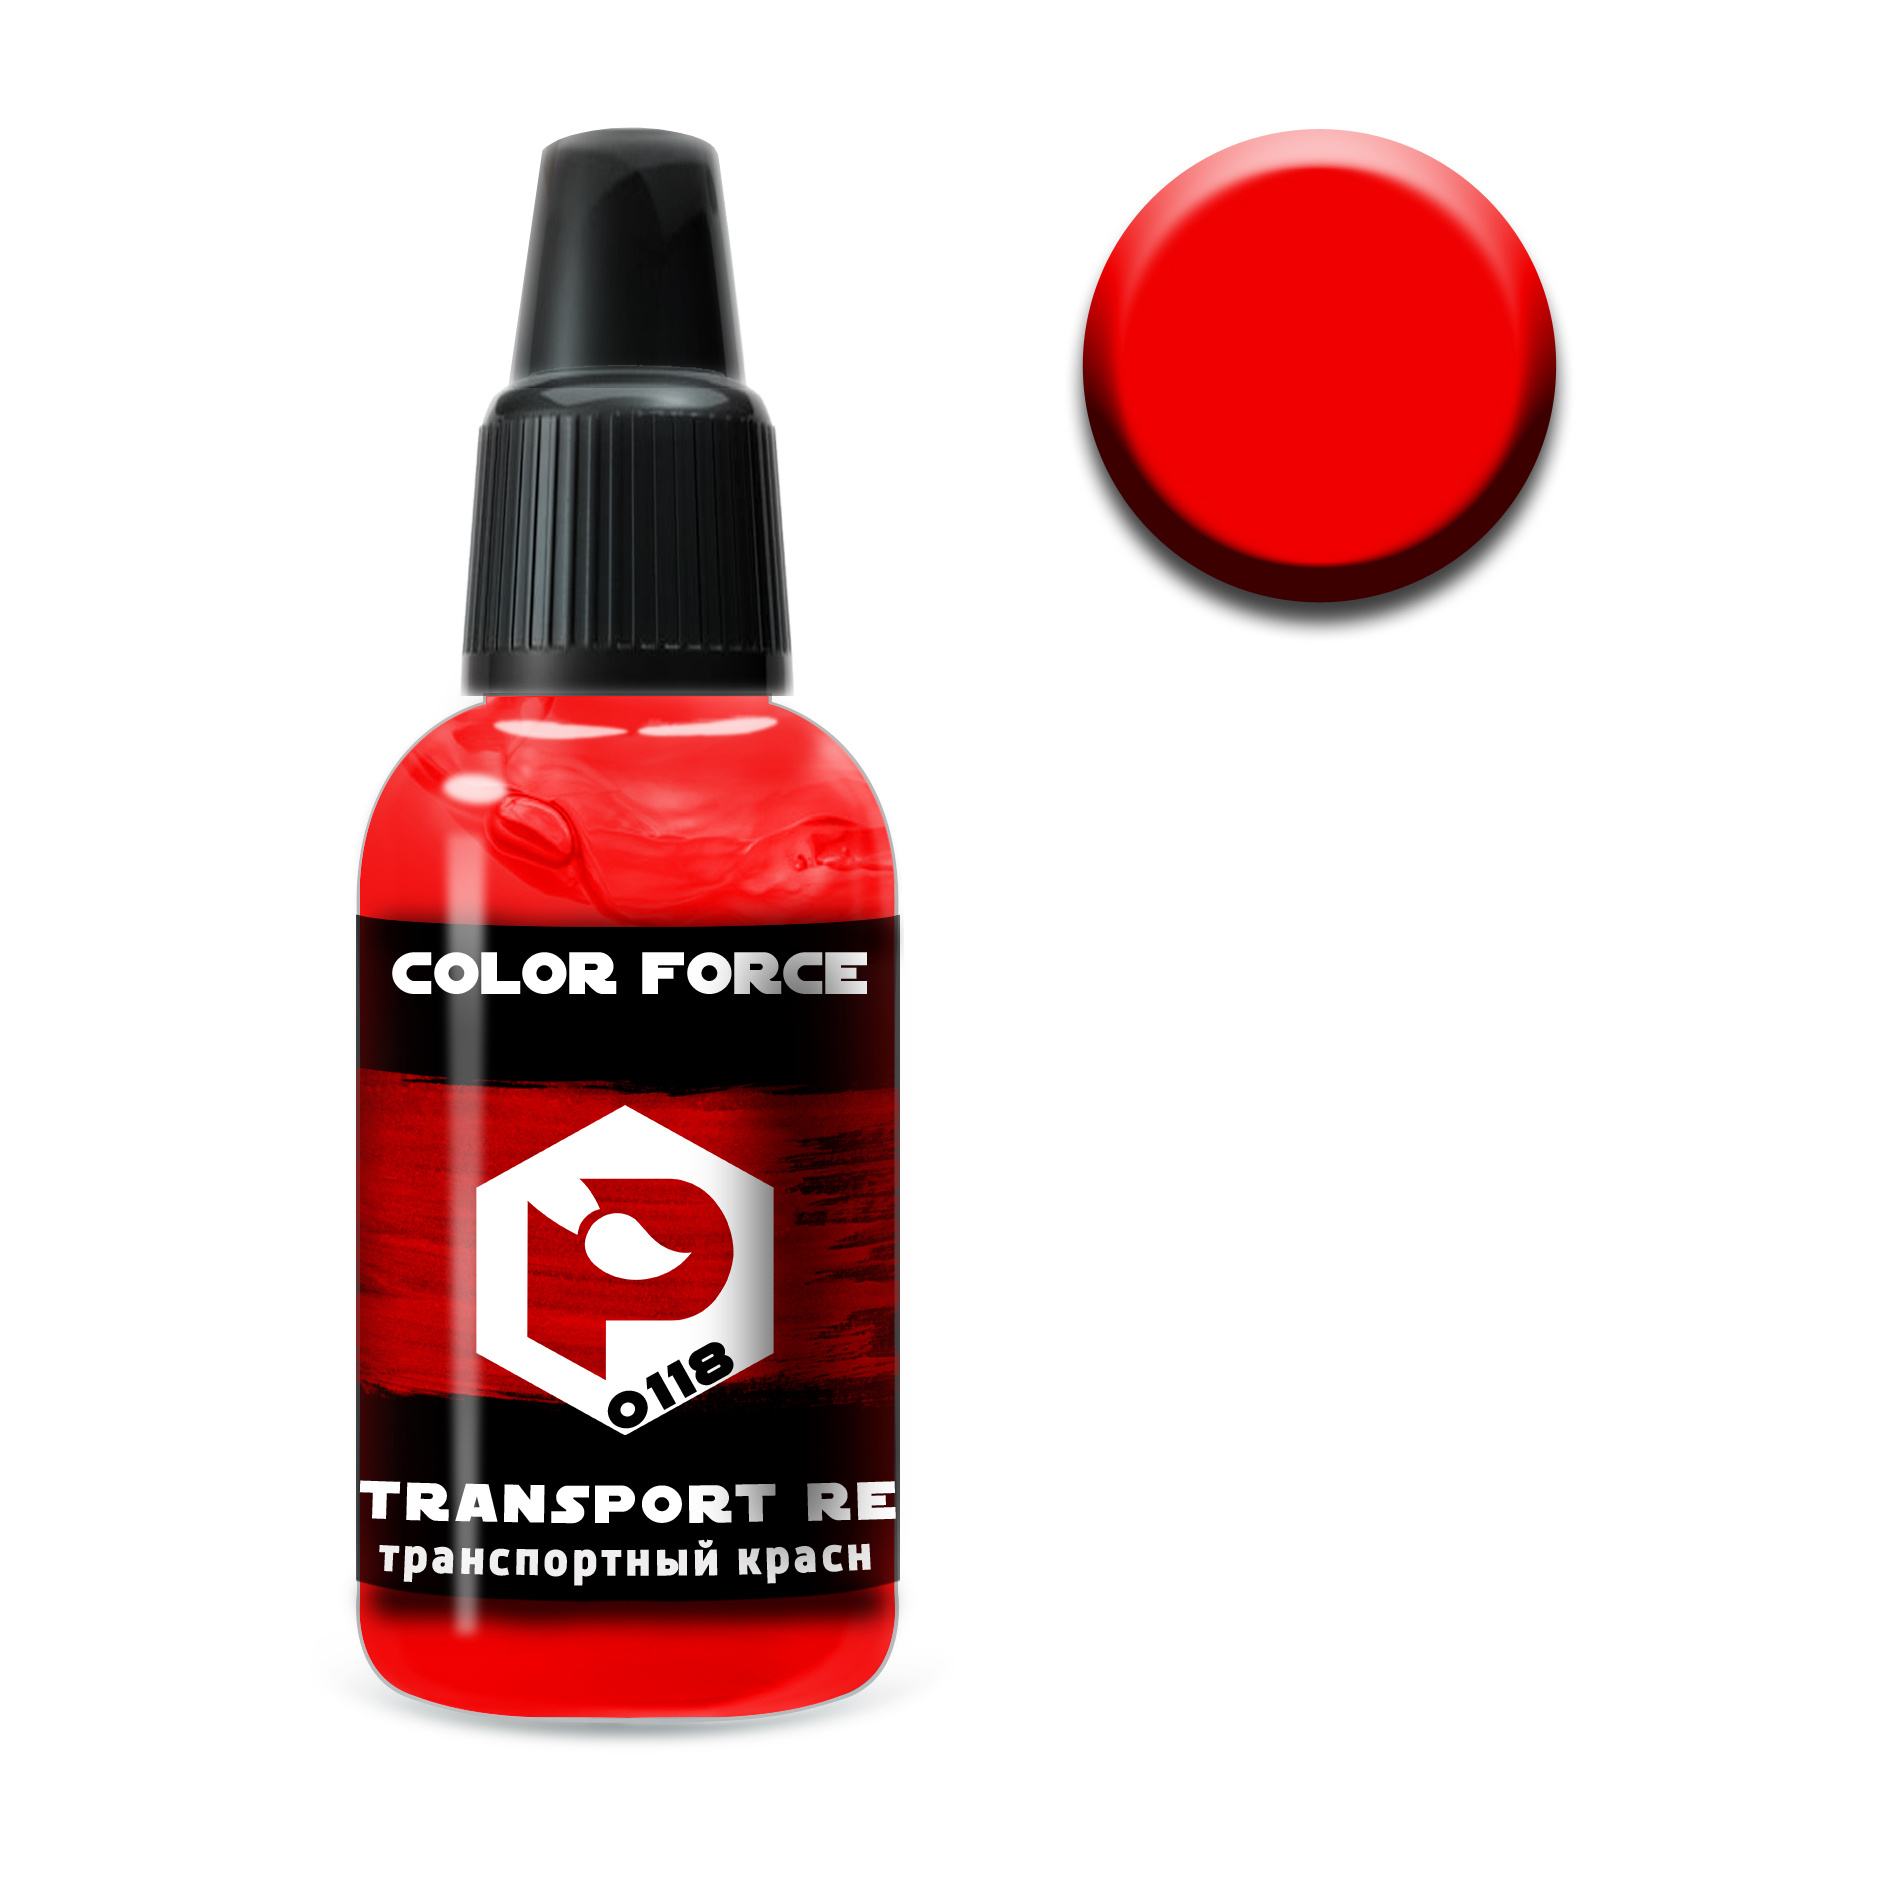 art.0118 Pacific88 airbrush Paint Transport red (Transport red)